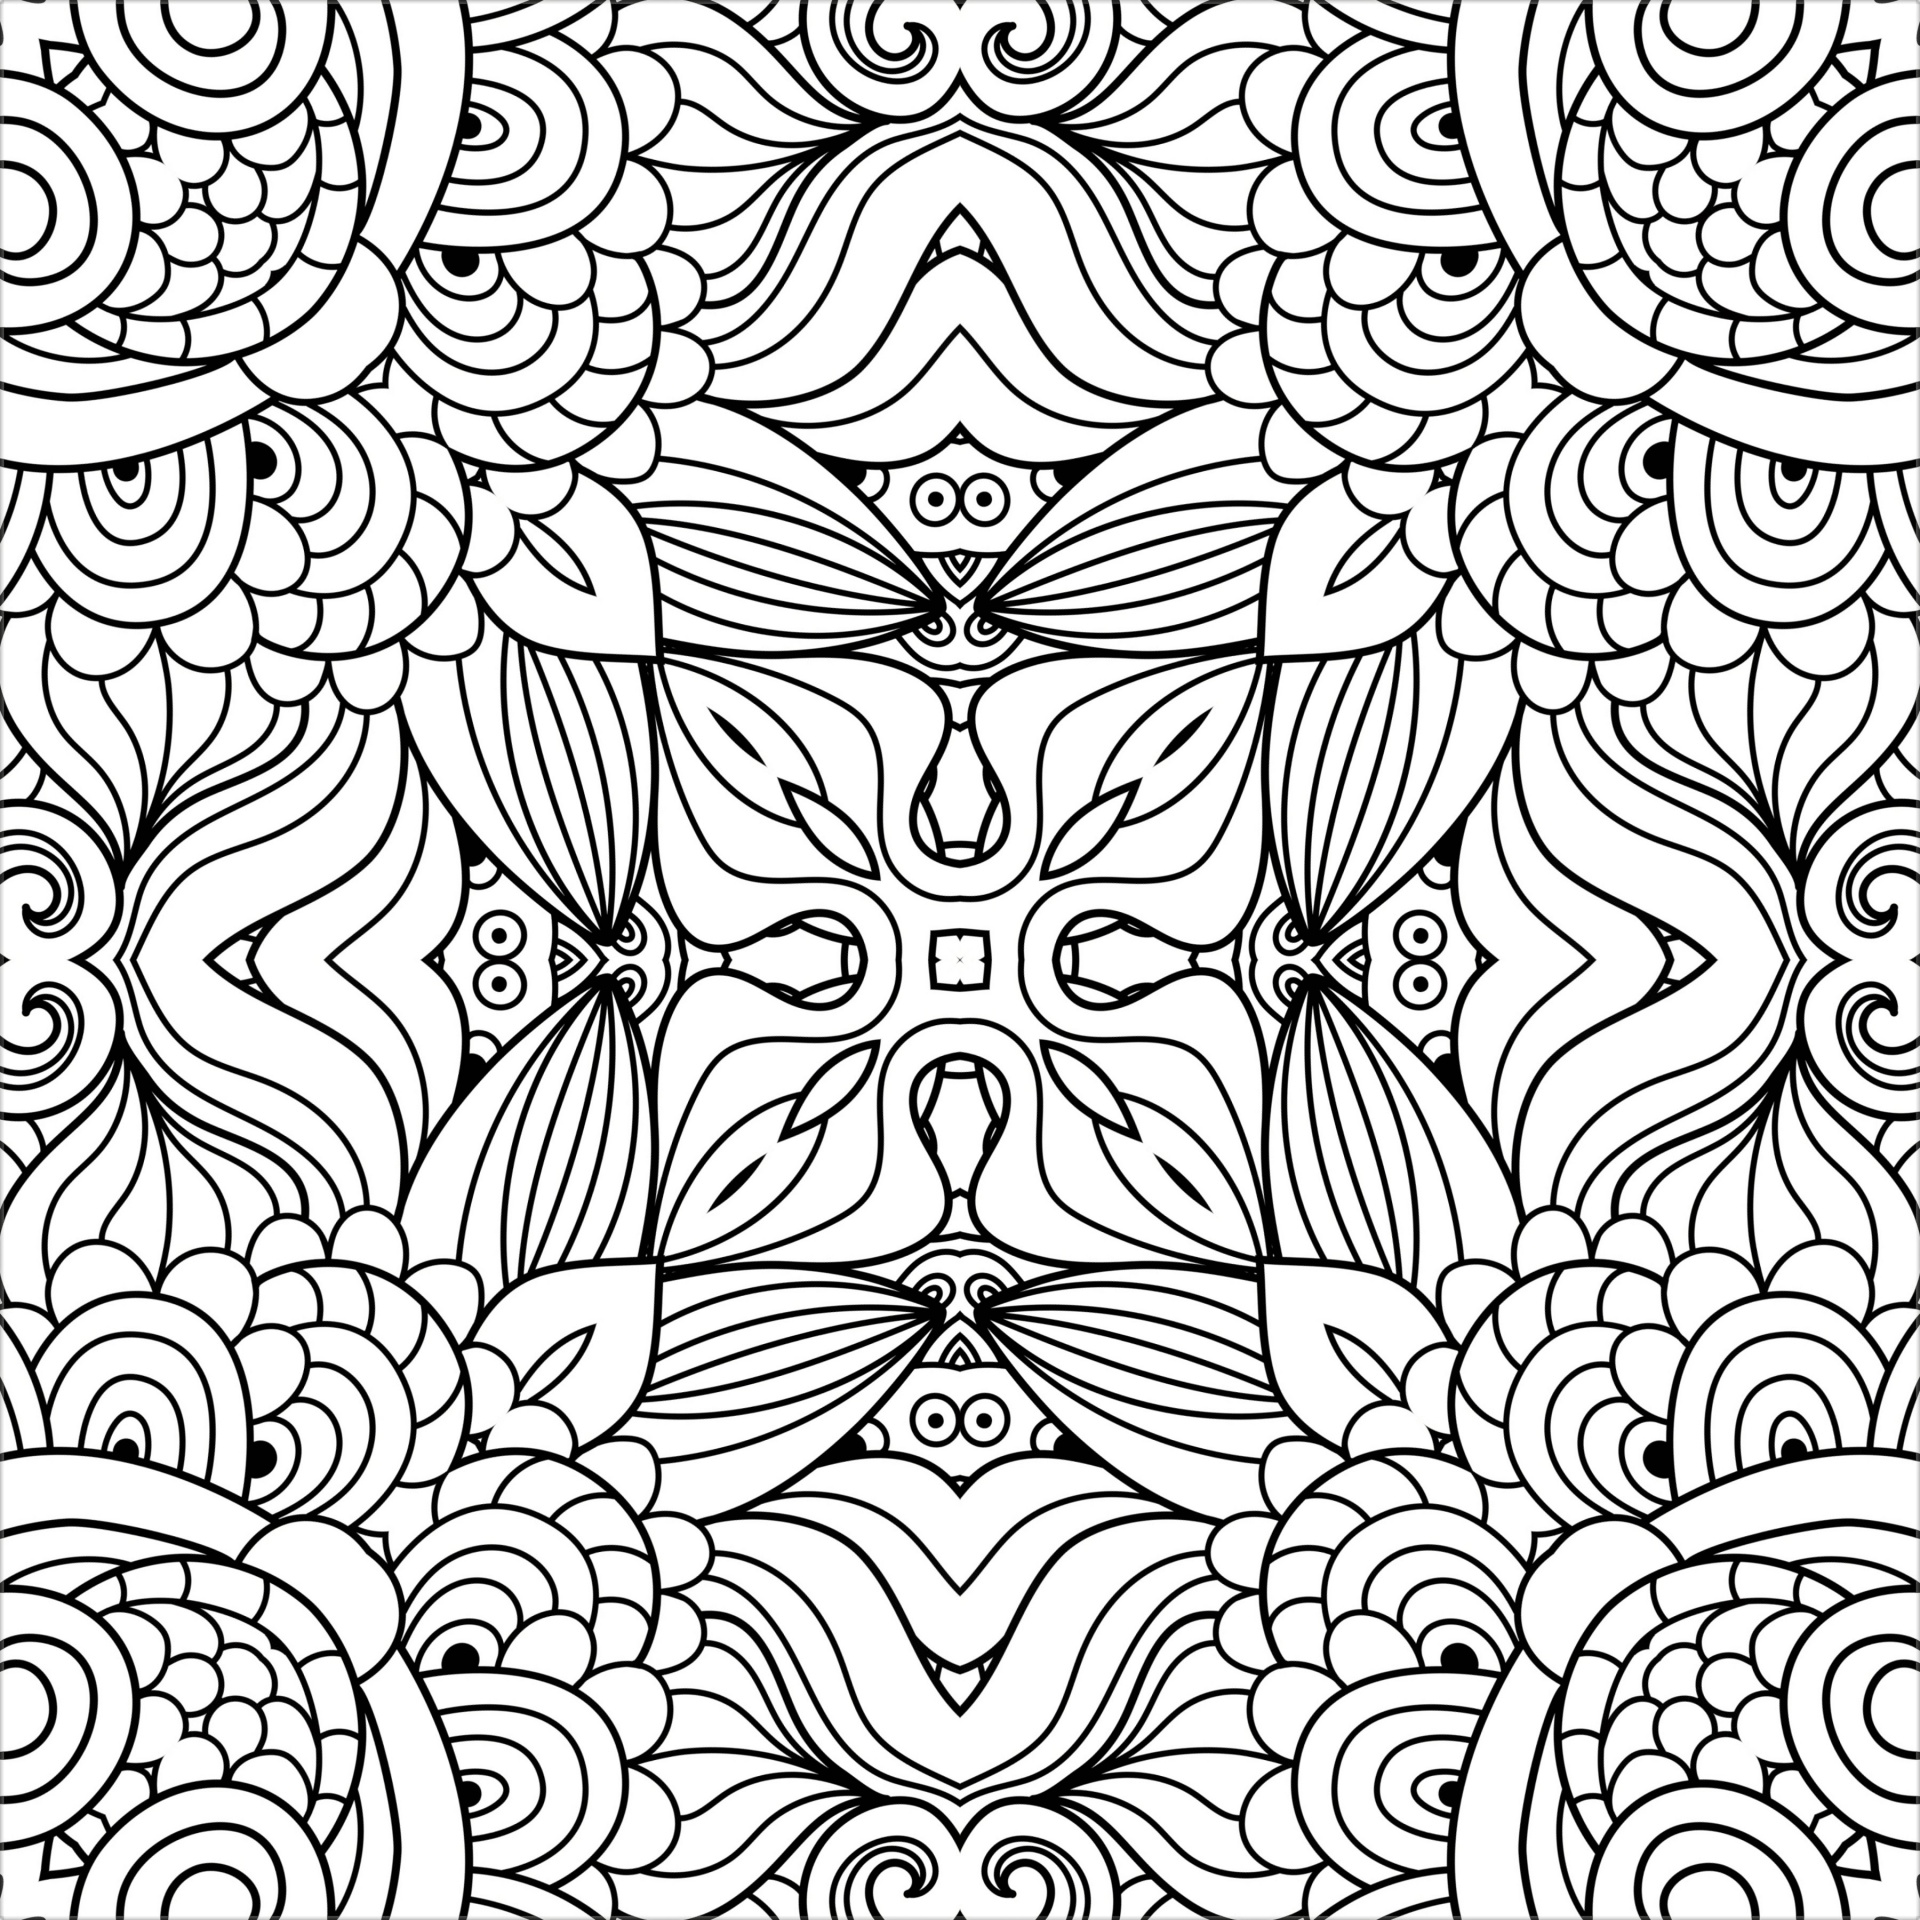 Coloring Page - 12